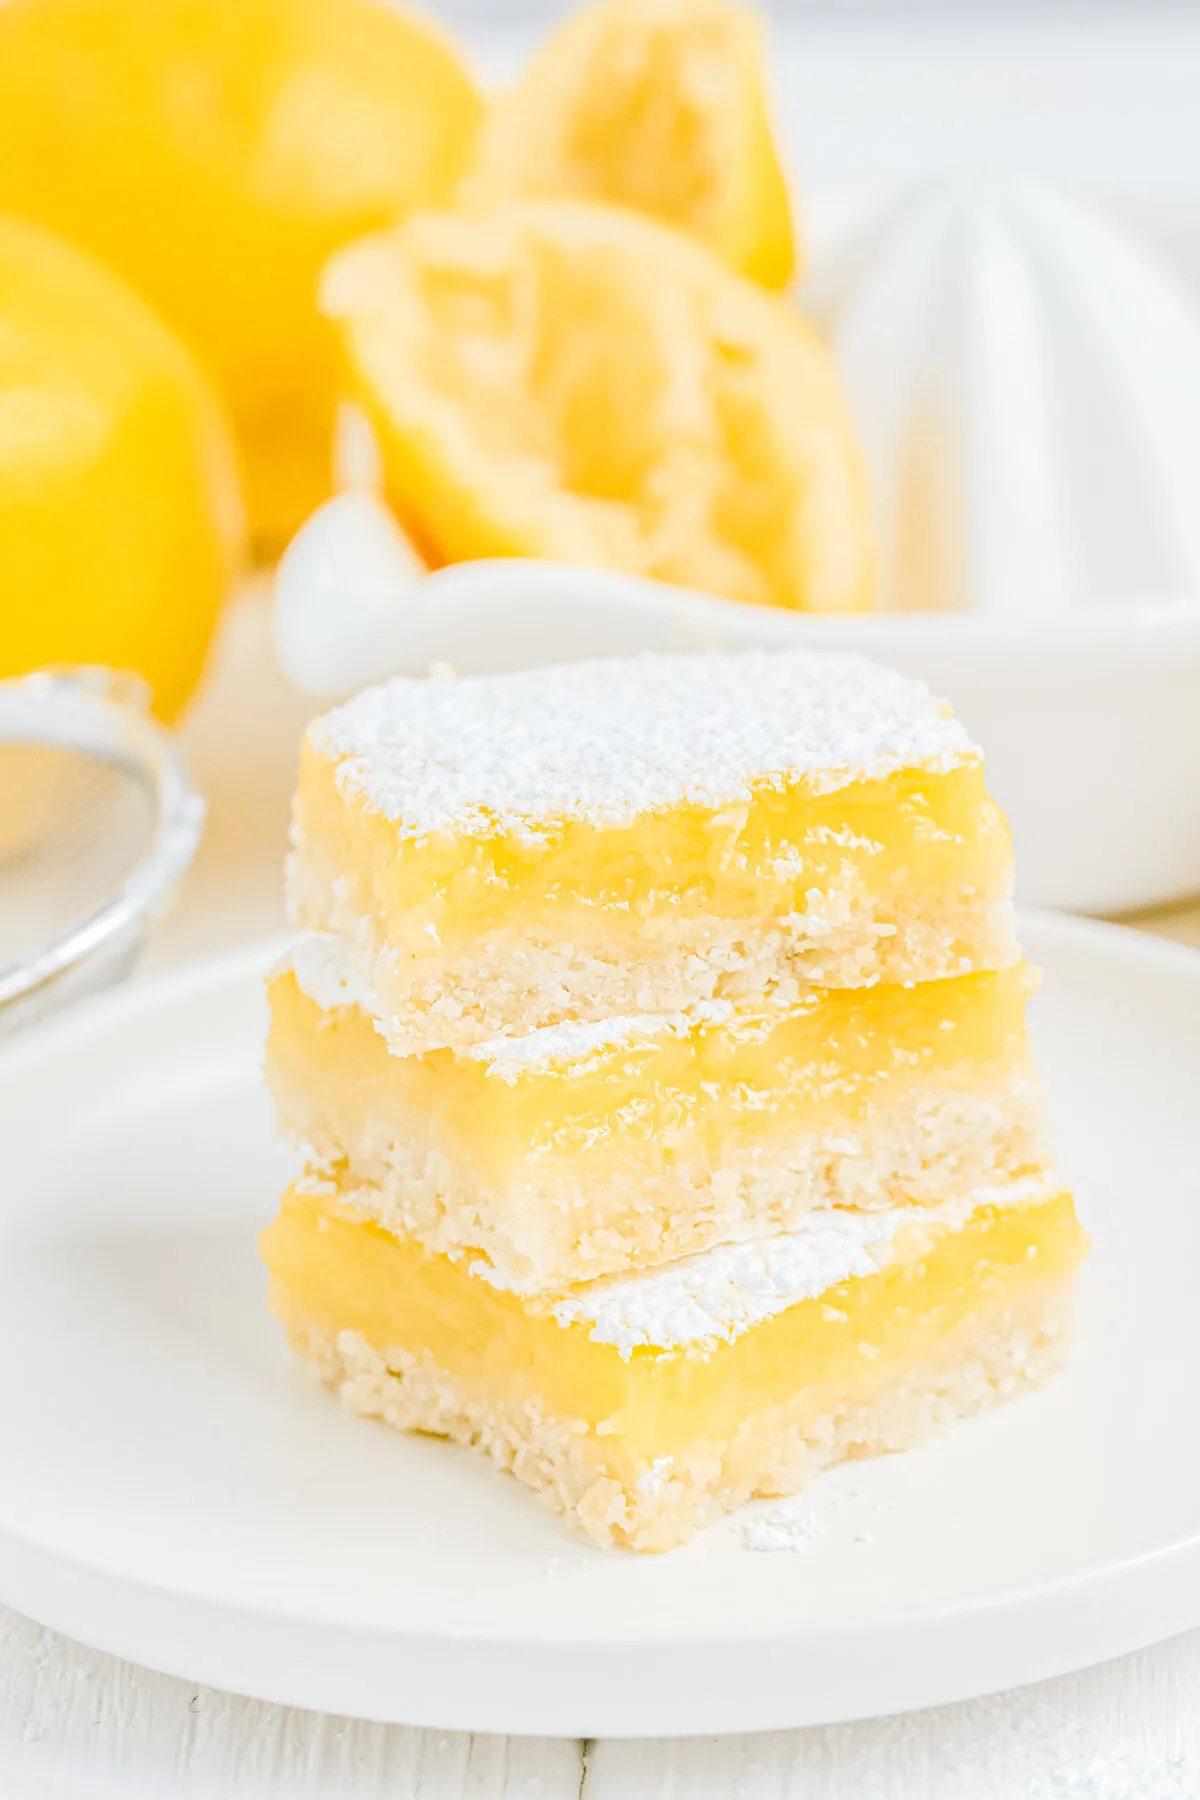 This is the best lemon bars recipe you'll ever make! Tart, sweet, and delicious with buttery shortbread crust - perfect for any occasion.